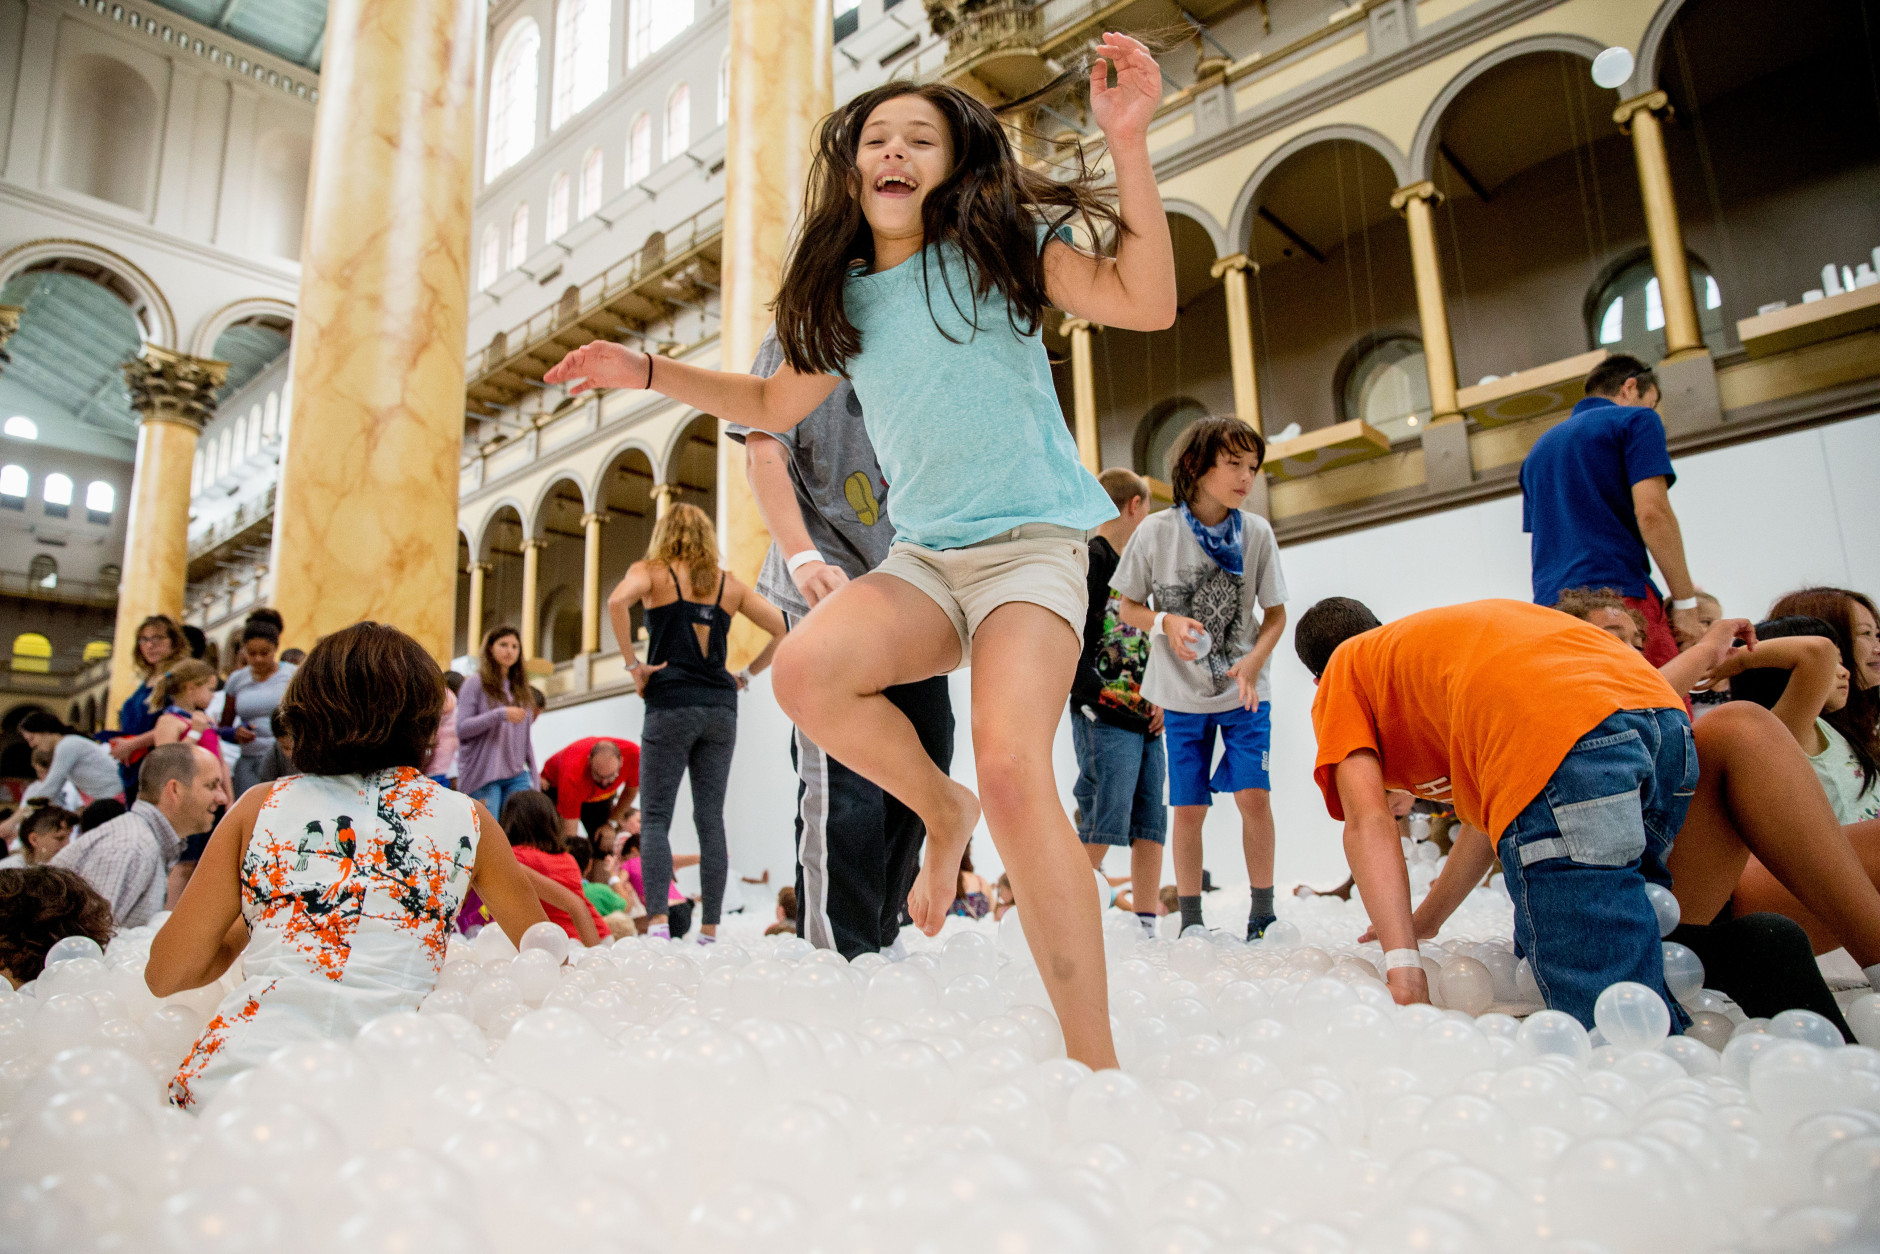 Ilana Cohen, 9, of Alexandria, Va., jumps into a sea of plastic balls at "The Beach", an interactive architectural installation inside the National Building Museum in Washington, Friday, July 17, 2015. The Beach, which spans the length of the museum's Great Hall, was created in partnership with Snarkitecture, and covers 10,000 square feet and includes an ocean of nearly one million recyclable translucent plastic balls. (AP Photo/Andrew Harnik)